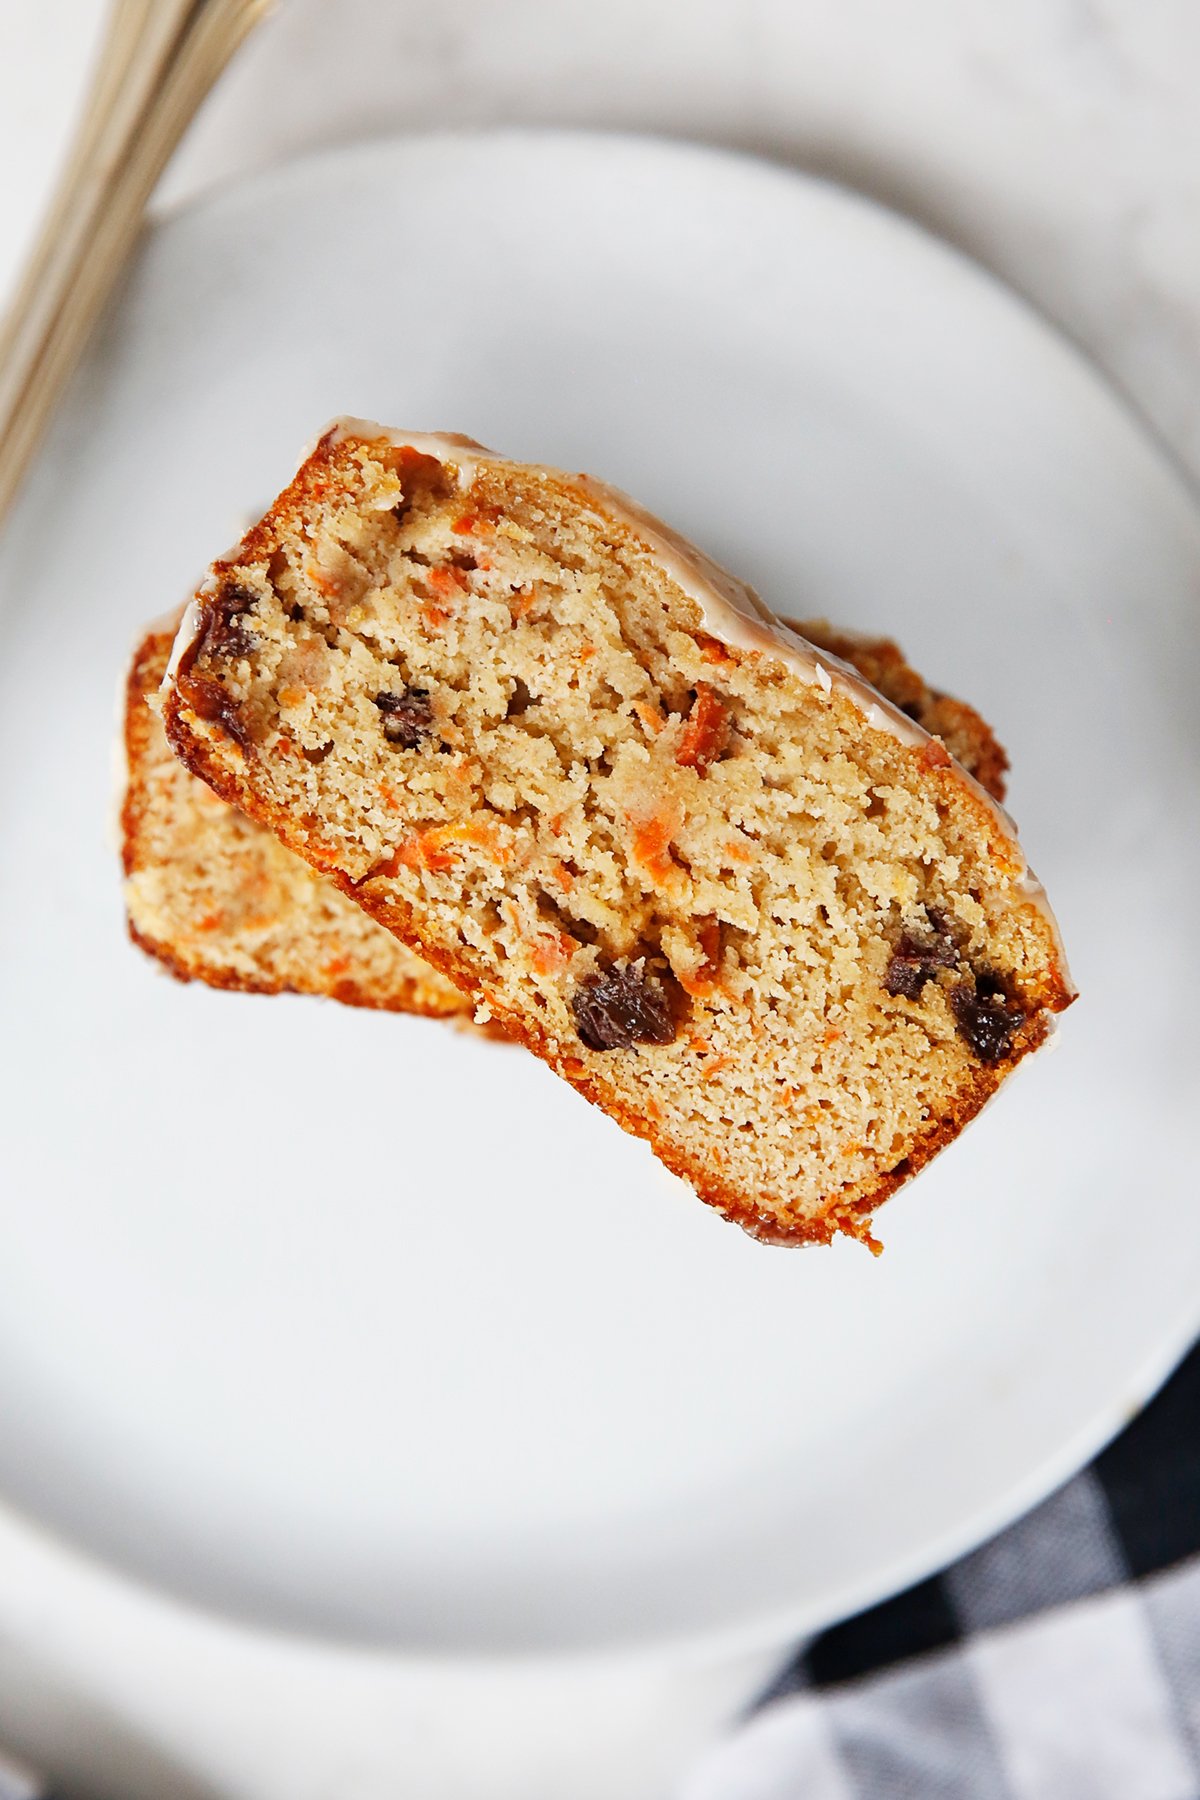 A slice of carrot bread on a plate.